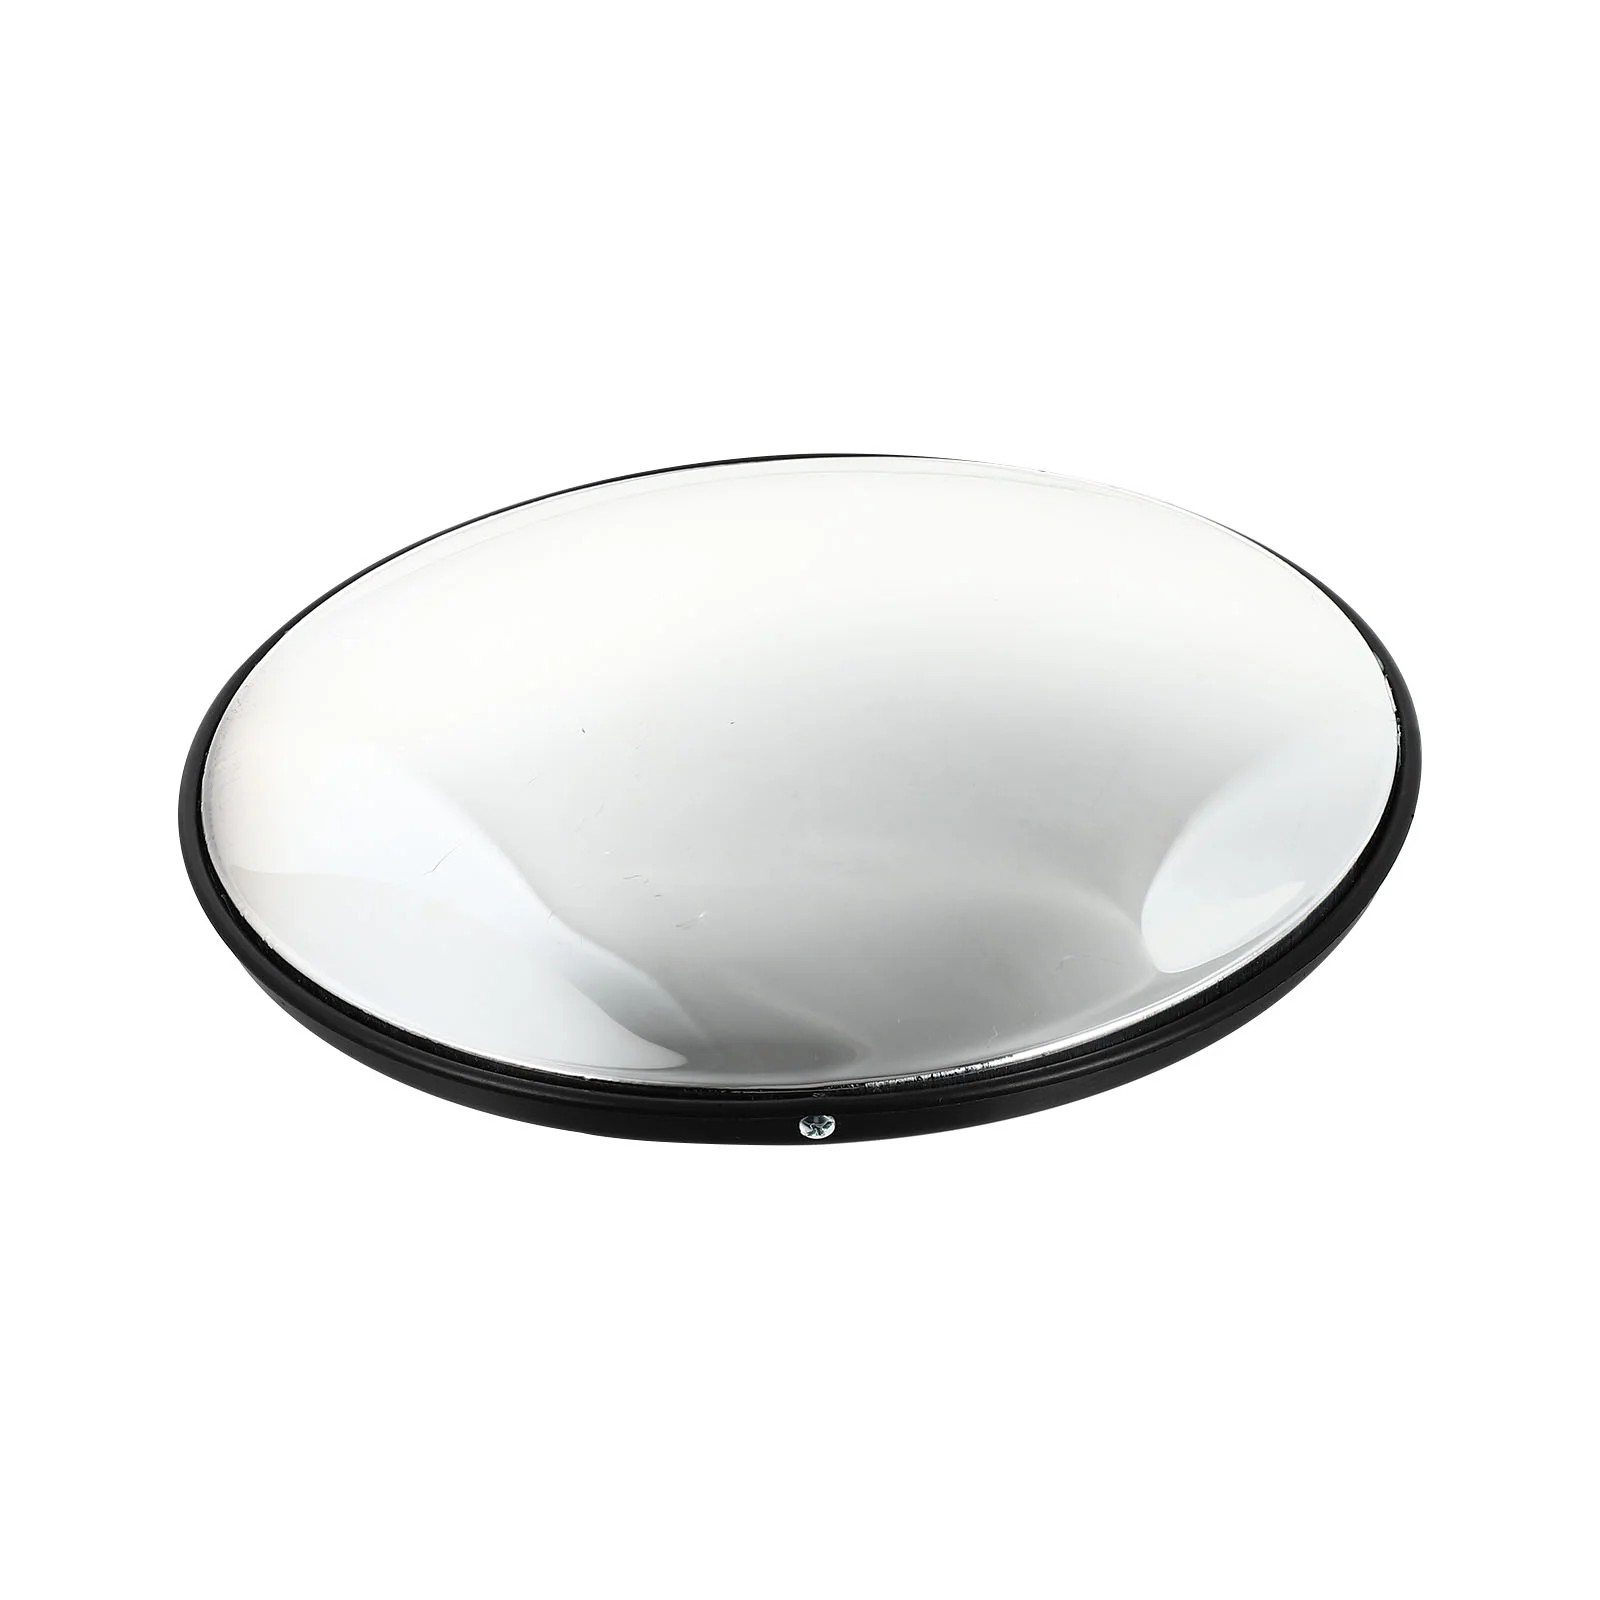 

Mirror Safety Traffic Convex Outdoor Driveway Road Mirrors Curveddriveways Wide Angle